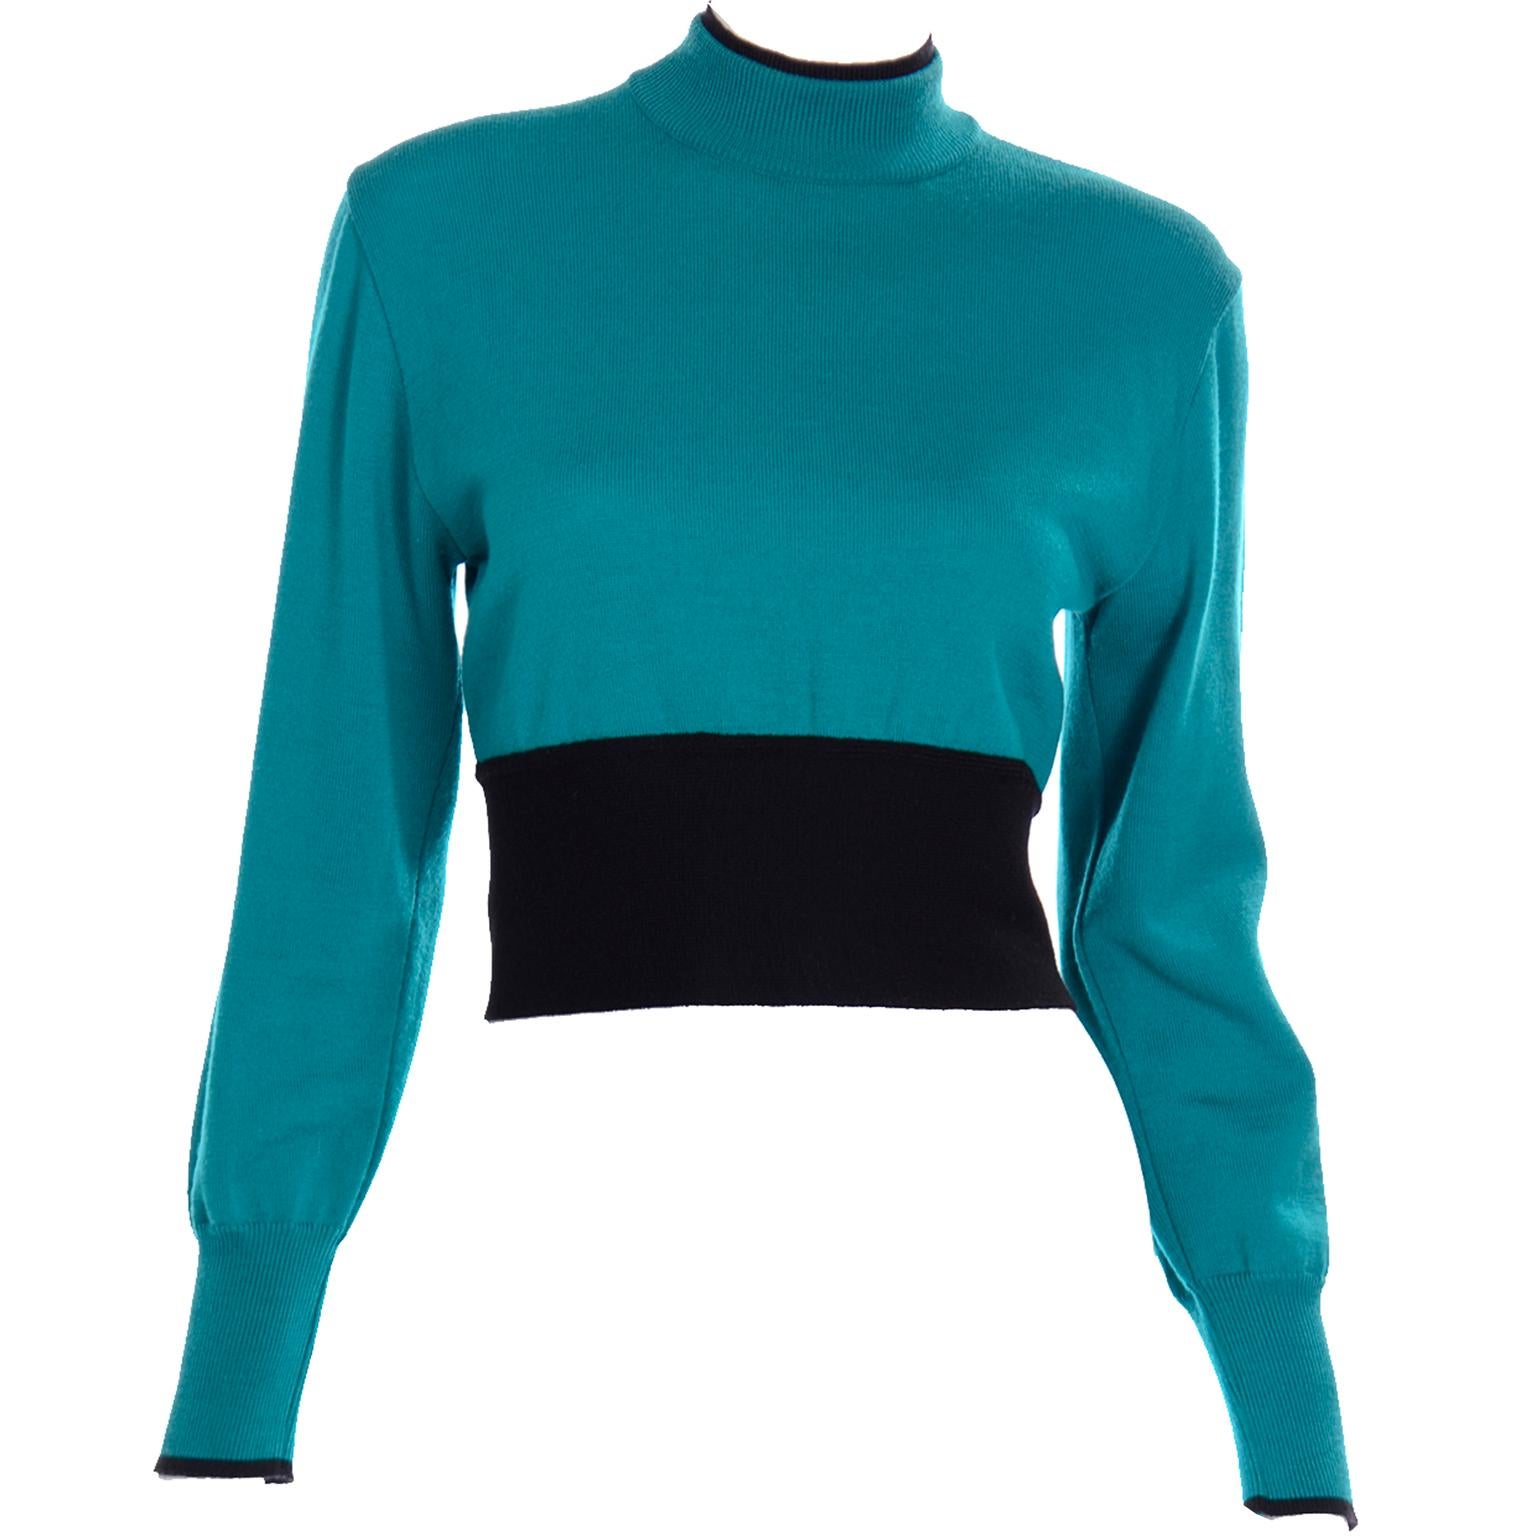 This vintage Emmanuelle Khanh teal wool sweater has a beautiful navy blue sash. The collar of the sweater top is a mock neck and has two layers, one being navy blue and the other teal. The sleeves are long and have a small navy blue tip at the